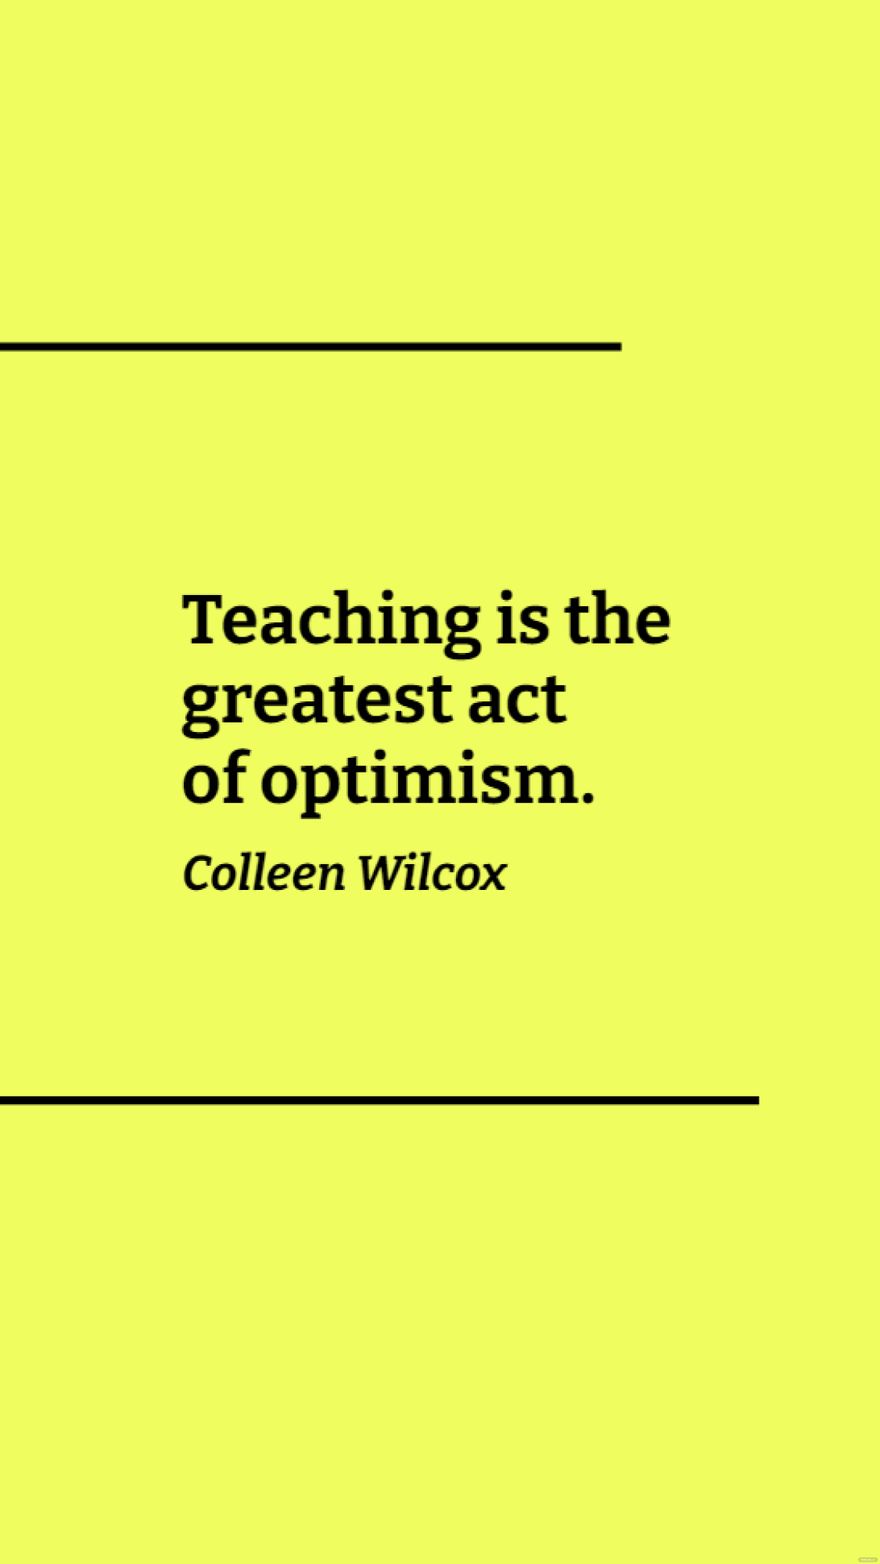 Free Colleen Wilcox - Teaching is the greatest act of optimism. in JPG